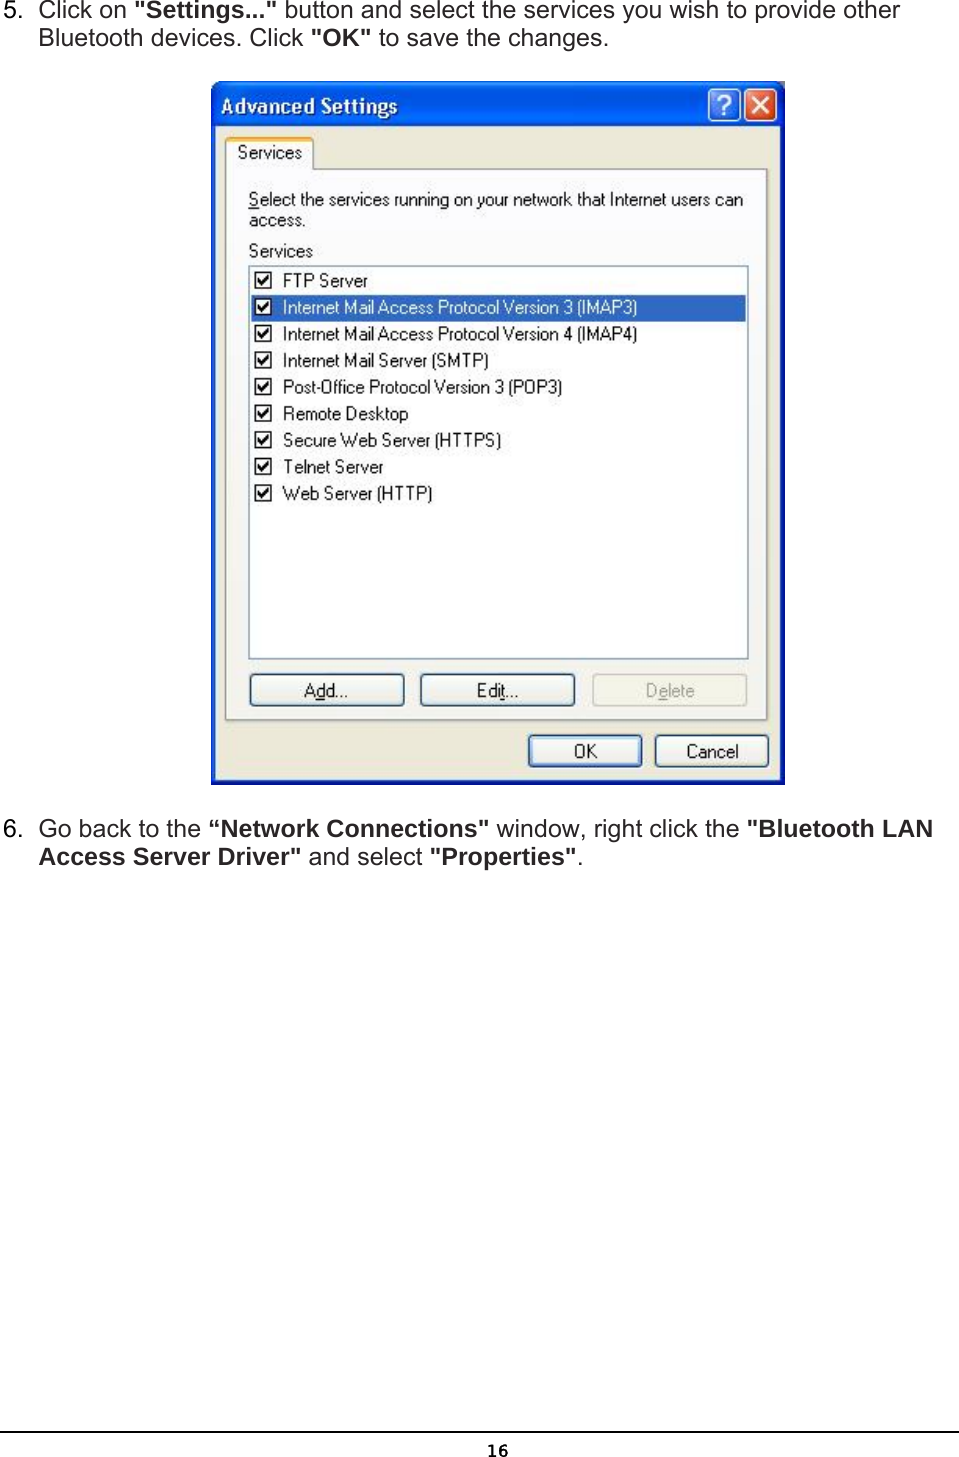   165.  Click on &quot;Settings...&quot; button and select the services you wish to provide other Bluetooth devices. Click &quot;OK&quot; to save the changes.  6.  Go back to the “Network Connections&quot; window, right click the &quot;Bluetooth LAN Access Server Driver&quot; and select &quot;Properties&quot;. 